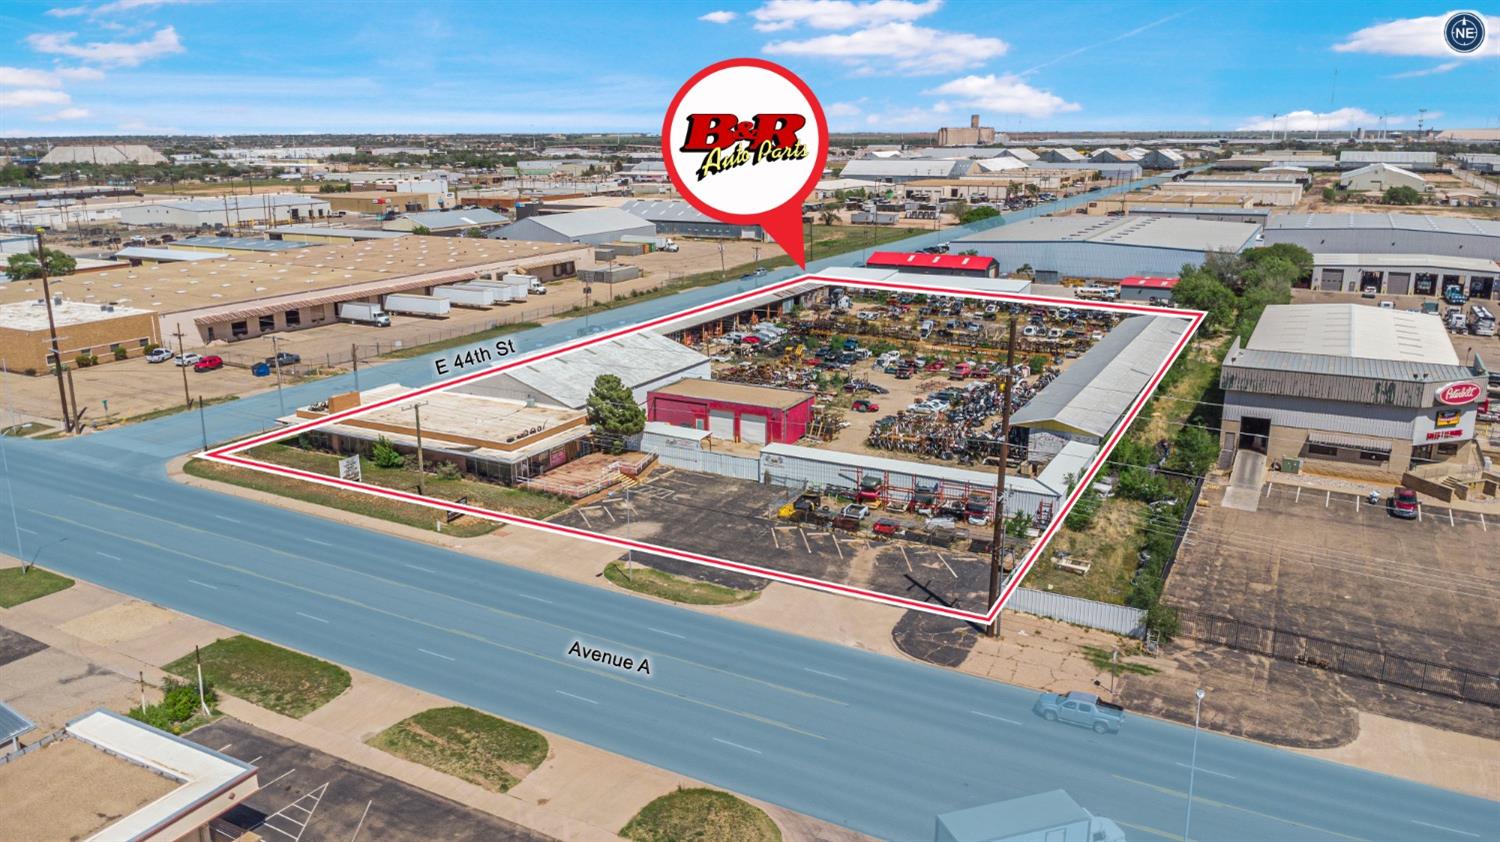 Lubbock Landmark Business location for sale. This retail, warehouse, distribution and repair, facility has great commercial appeal on ave A near 50th. Lubbock and surrounding areas are familiar with this location that served as home to a thriving auto parts business for over 40 years.